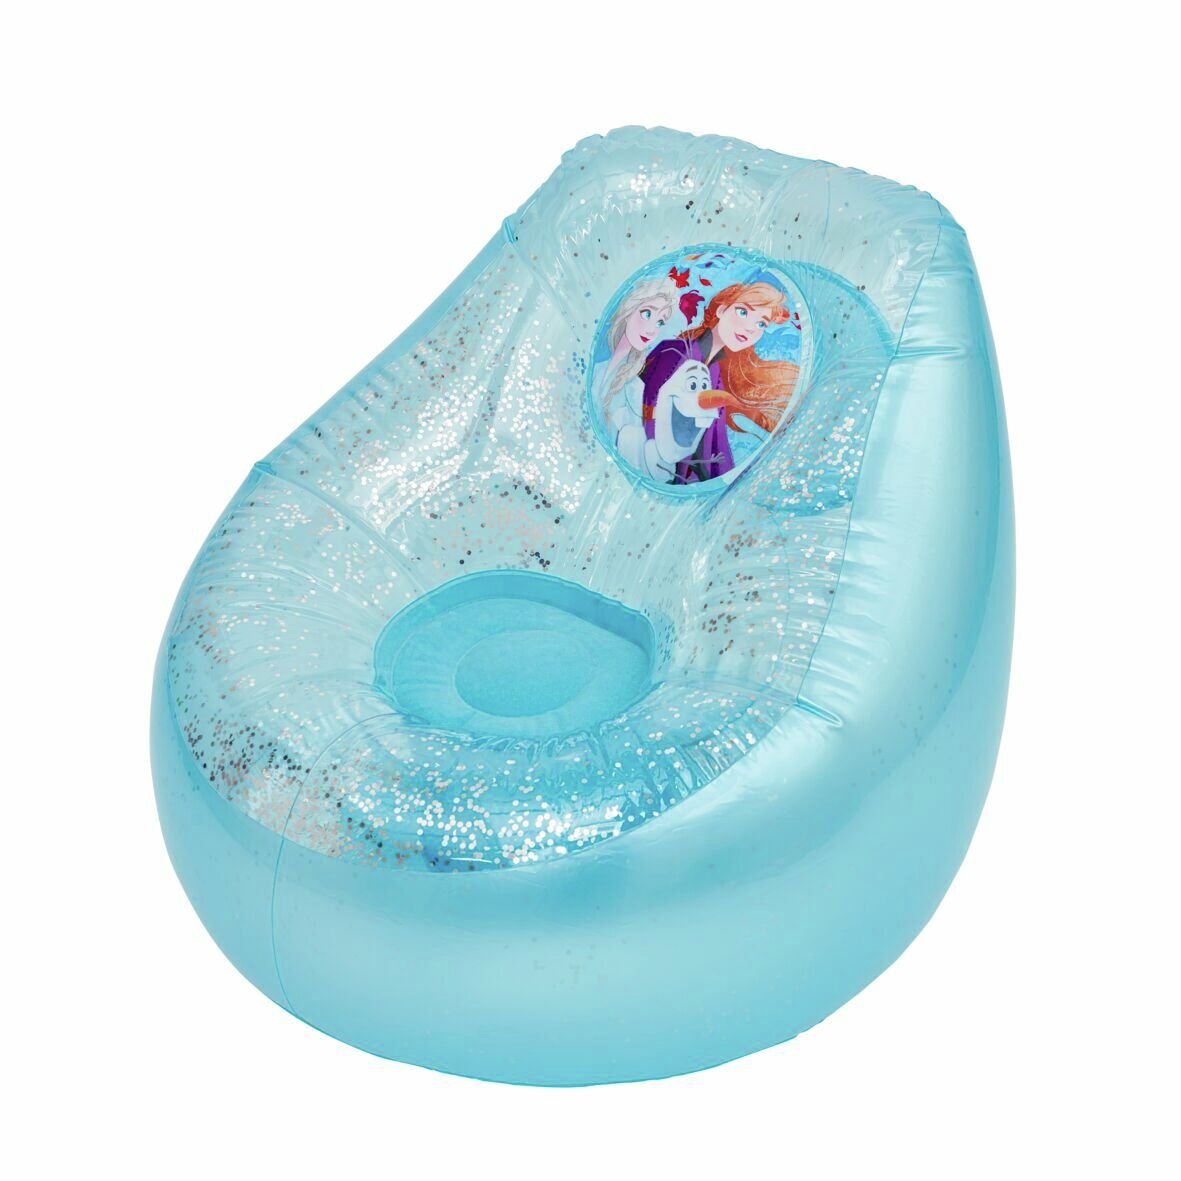 Disney Frozen 2 Inflatable Glitter Chill Chair Review